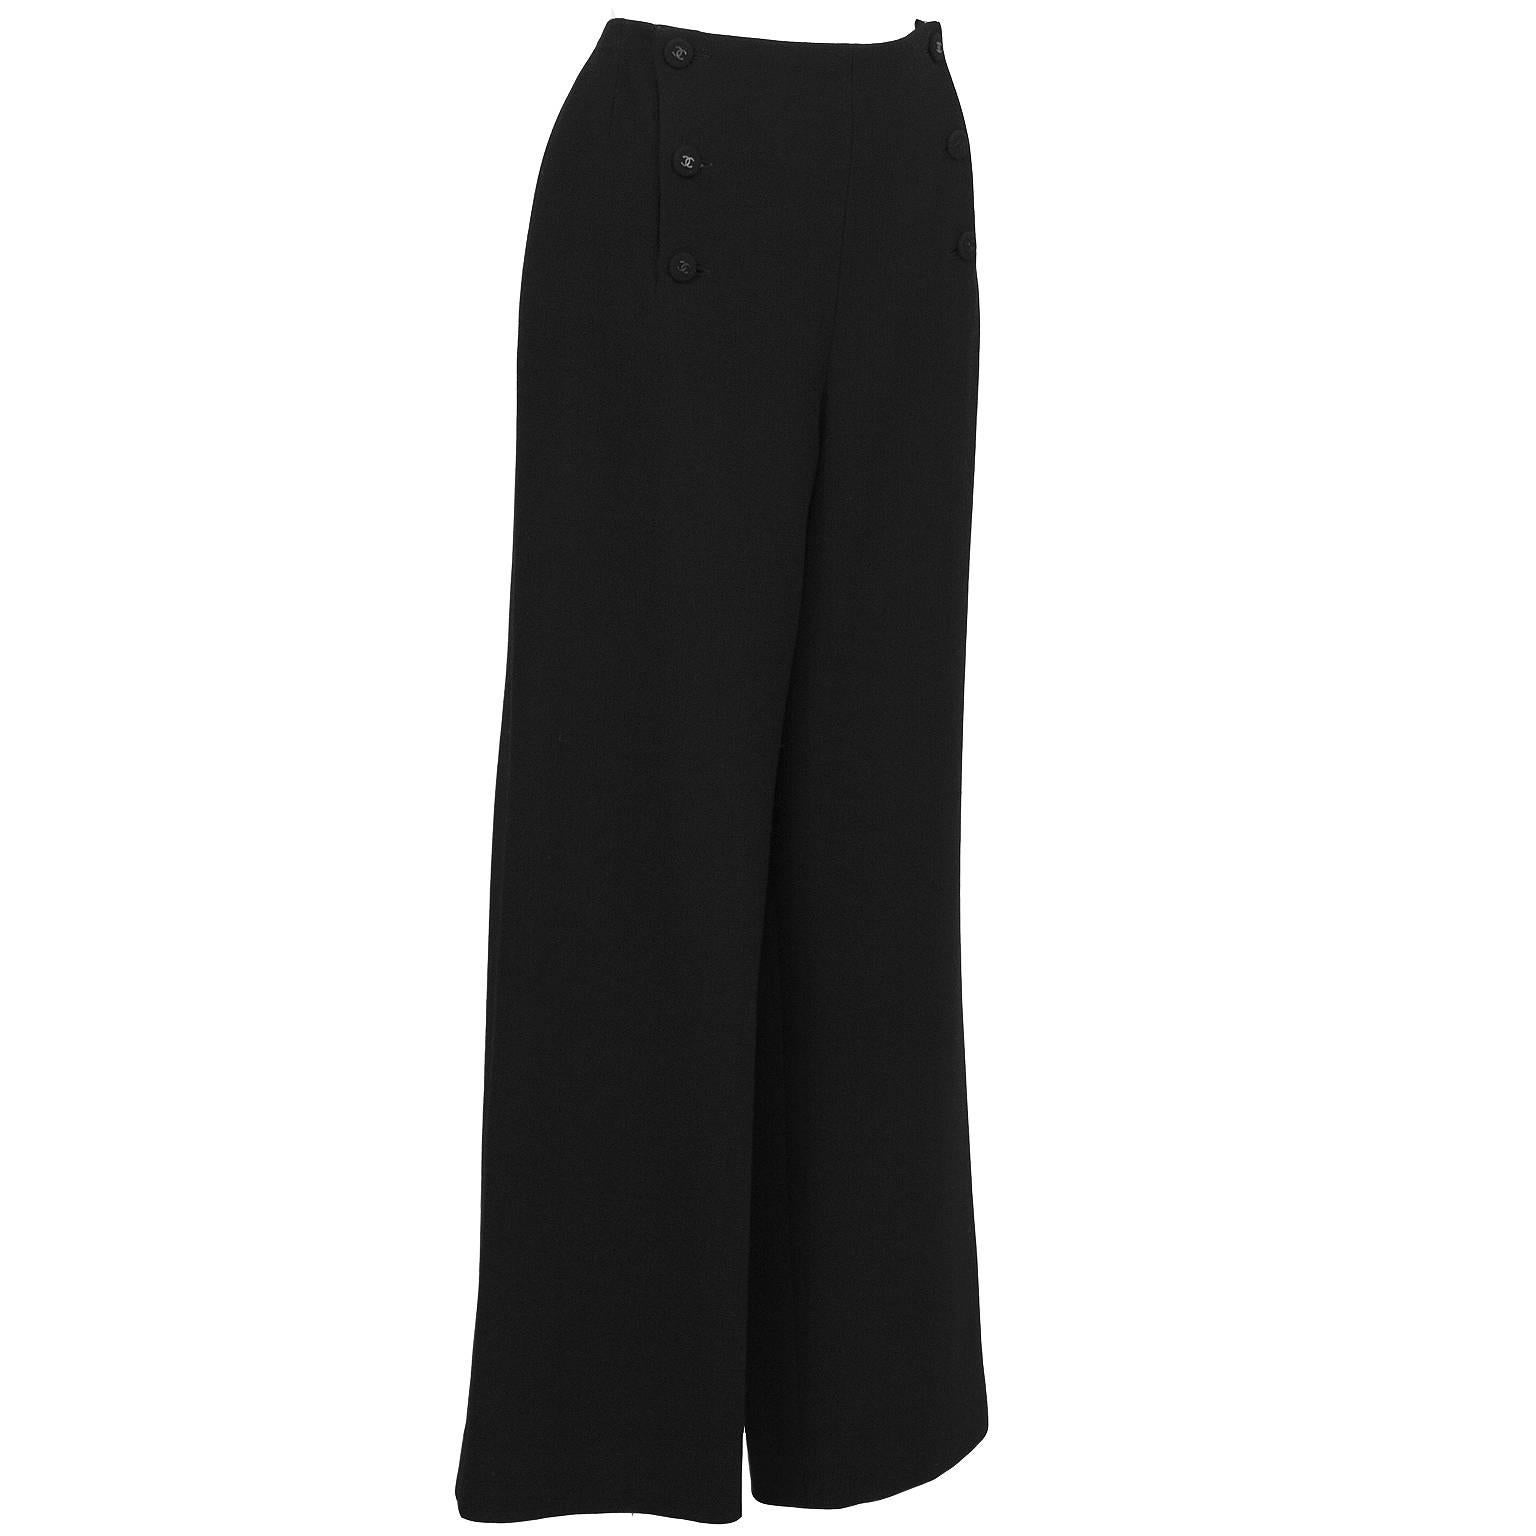 Chanel black sailor-style button front pants from the Fall 1997 collection. The pants feature a wide leg and fastens up the front with 6 fabric covered buttons with gunmetal black cc in the center. In excellent condition. Fits like a US 8-10. 